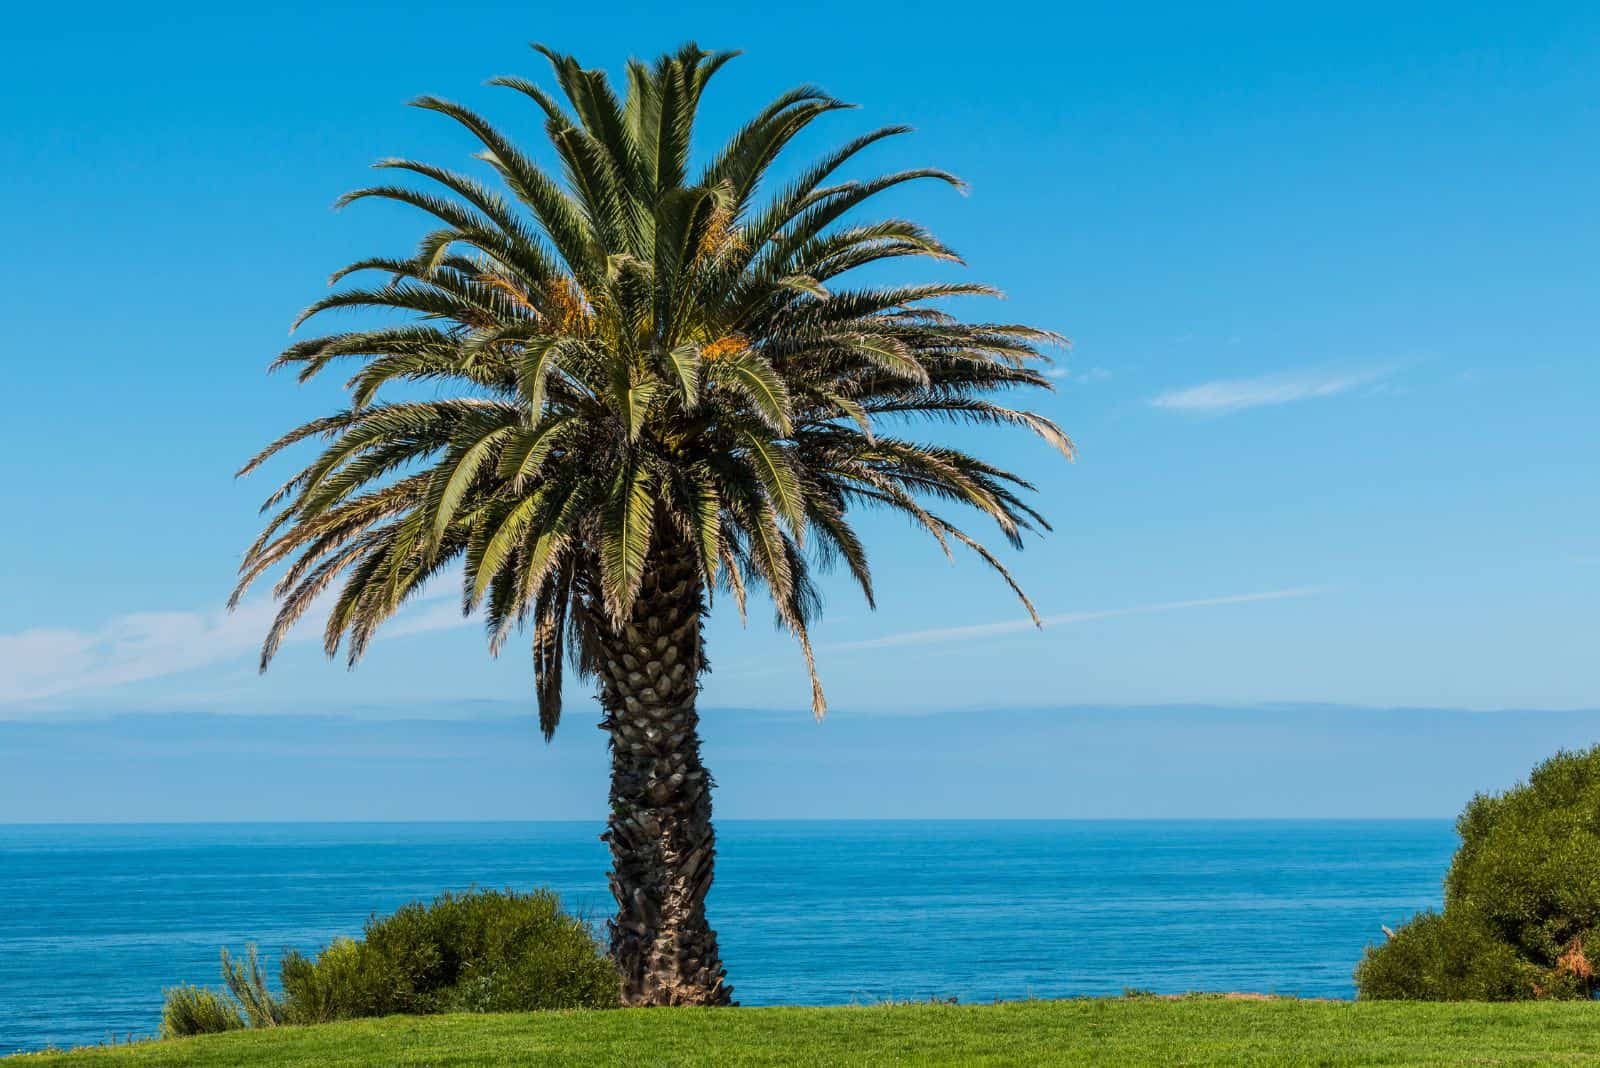 Canary Island Date Palm on lawn